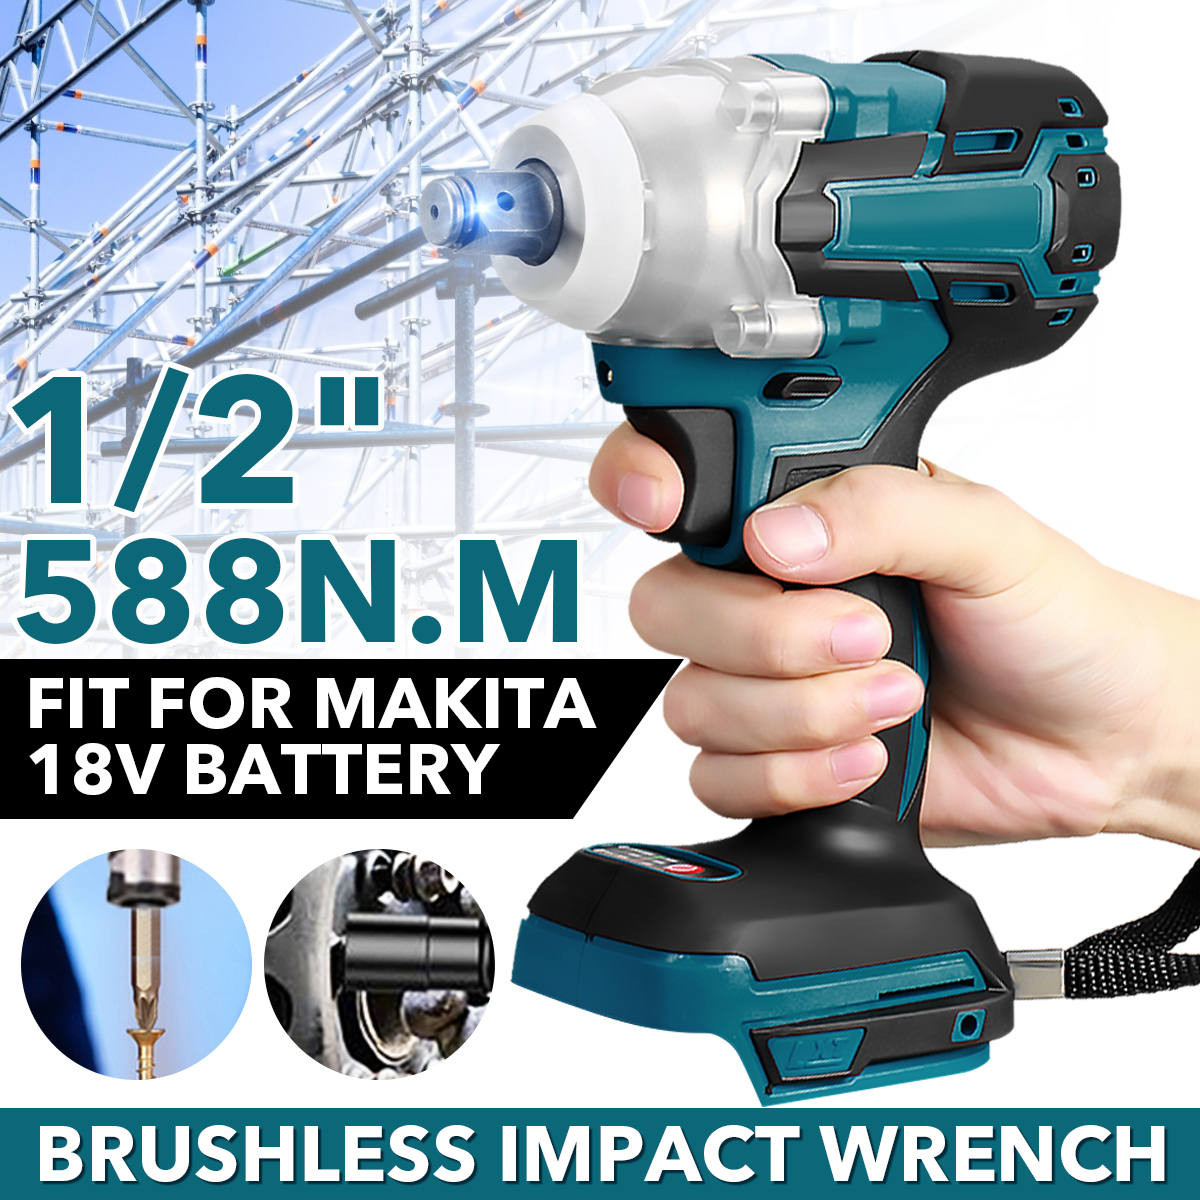 588Nm-Cordless-Brushless-Wrench12-Impact-Wrench-Driver-Replacement-for-Makita-18V-Battery-1856002-1